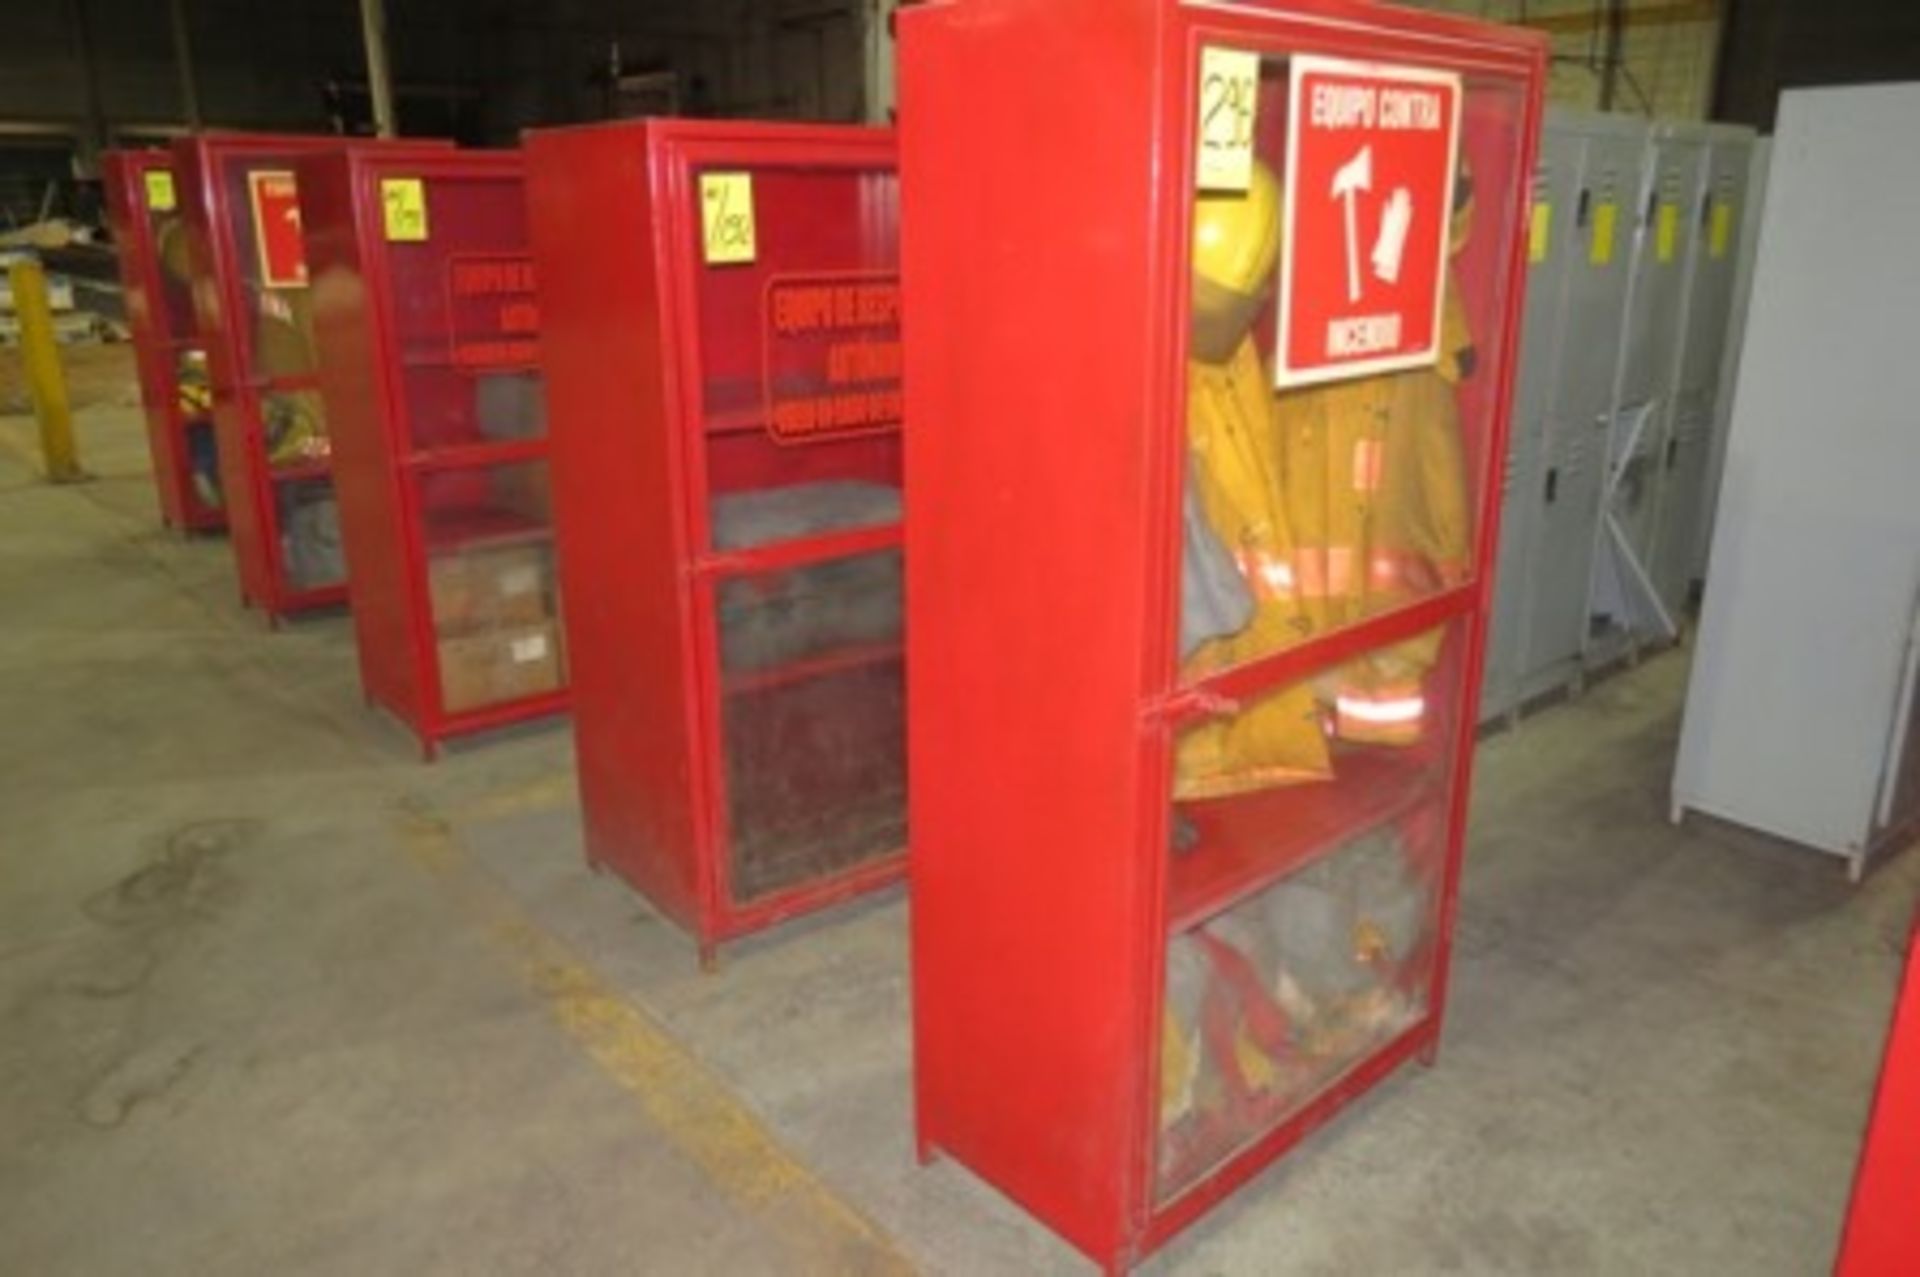 (2) Cabinets with firefighting gear. Cabinet with first aid gear